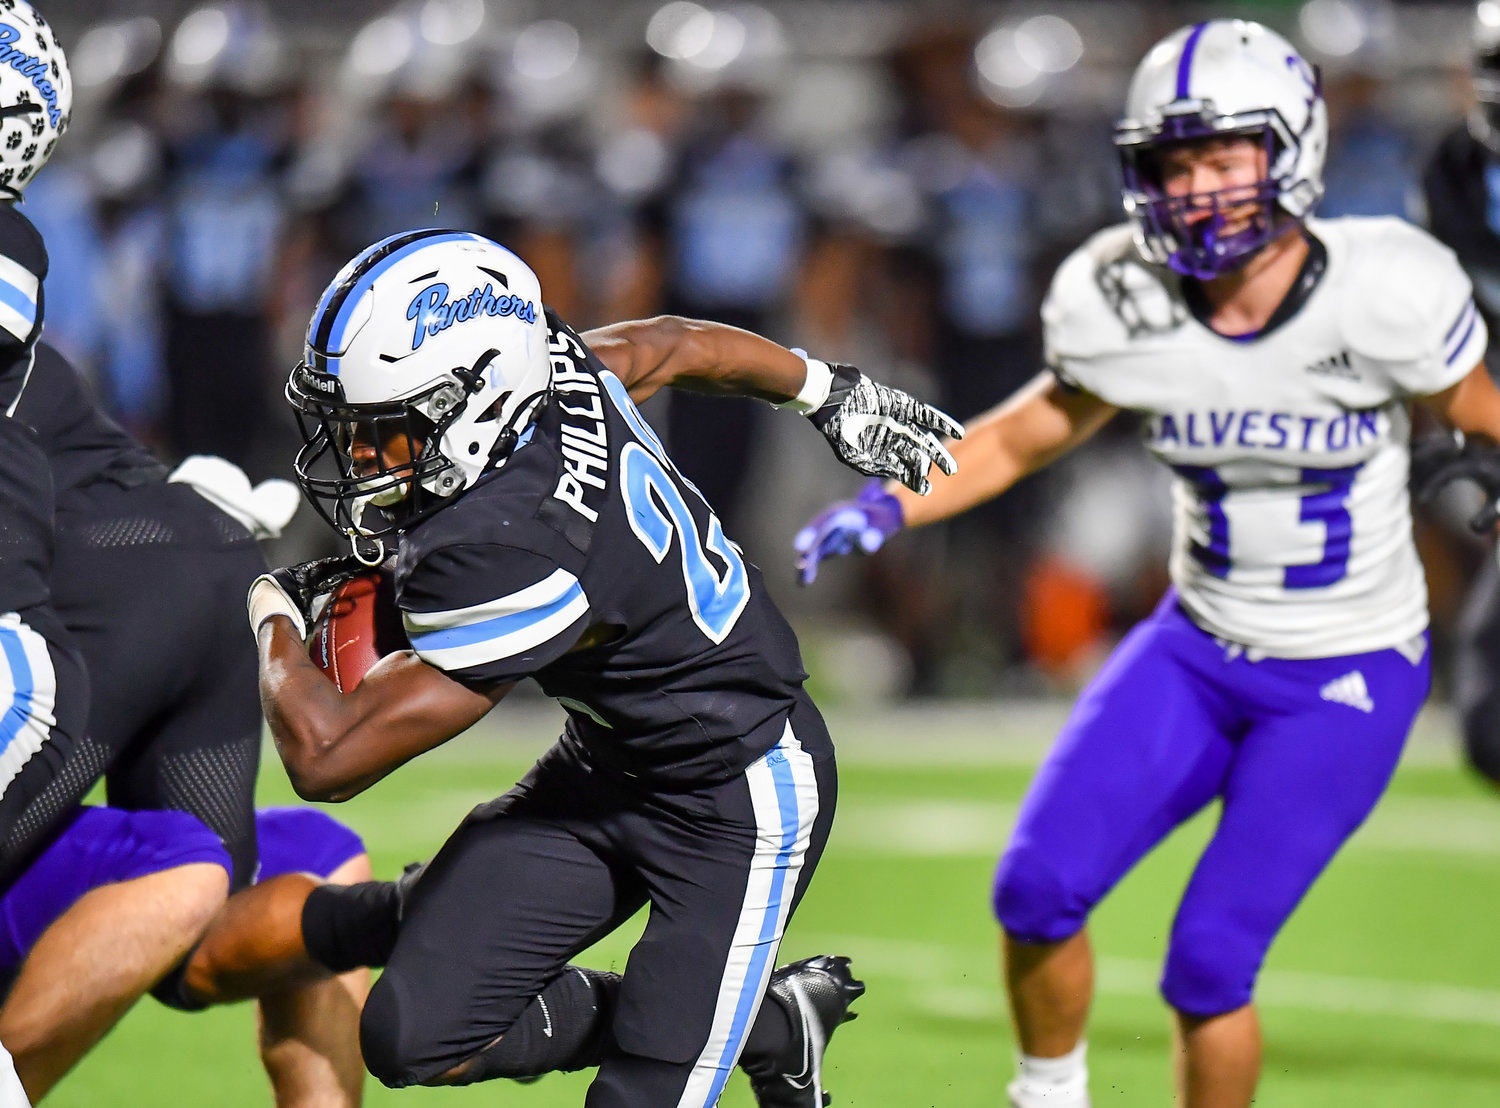 Katy, Tx. Nov 11, 2021: Paetow's Damyrion Phillips #22 carries the ball up the middle during a playoff game between Paetow and Galveston Ball  at Legacy Stadium in Katy. (Photo by Mark Goodman / Katy Times)